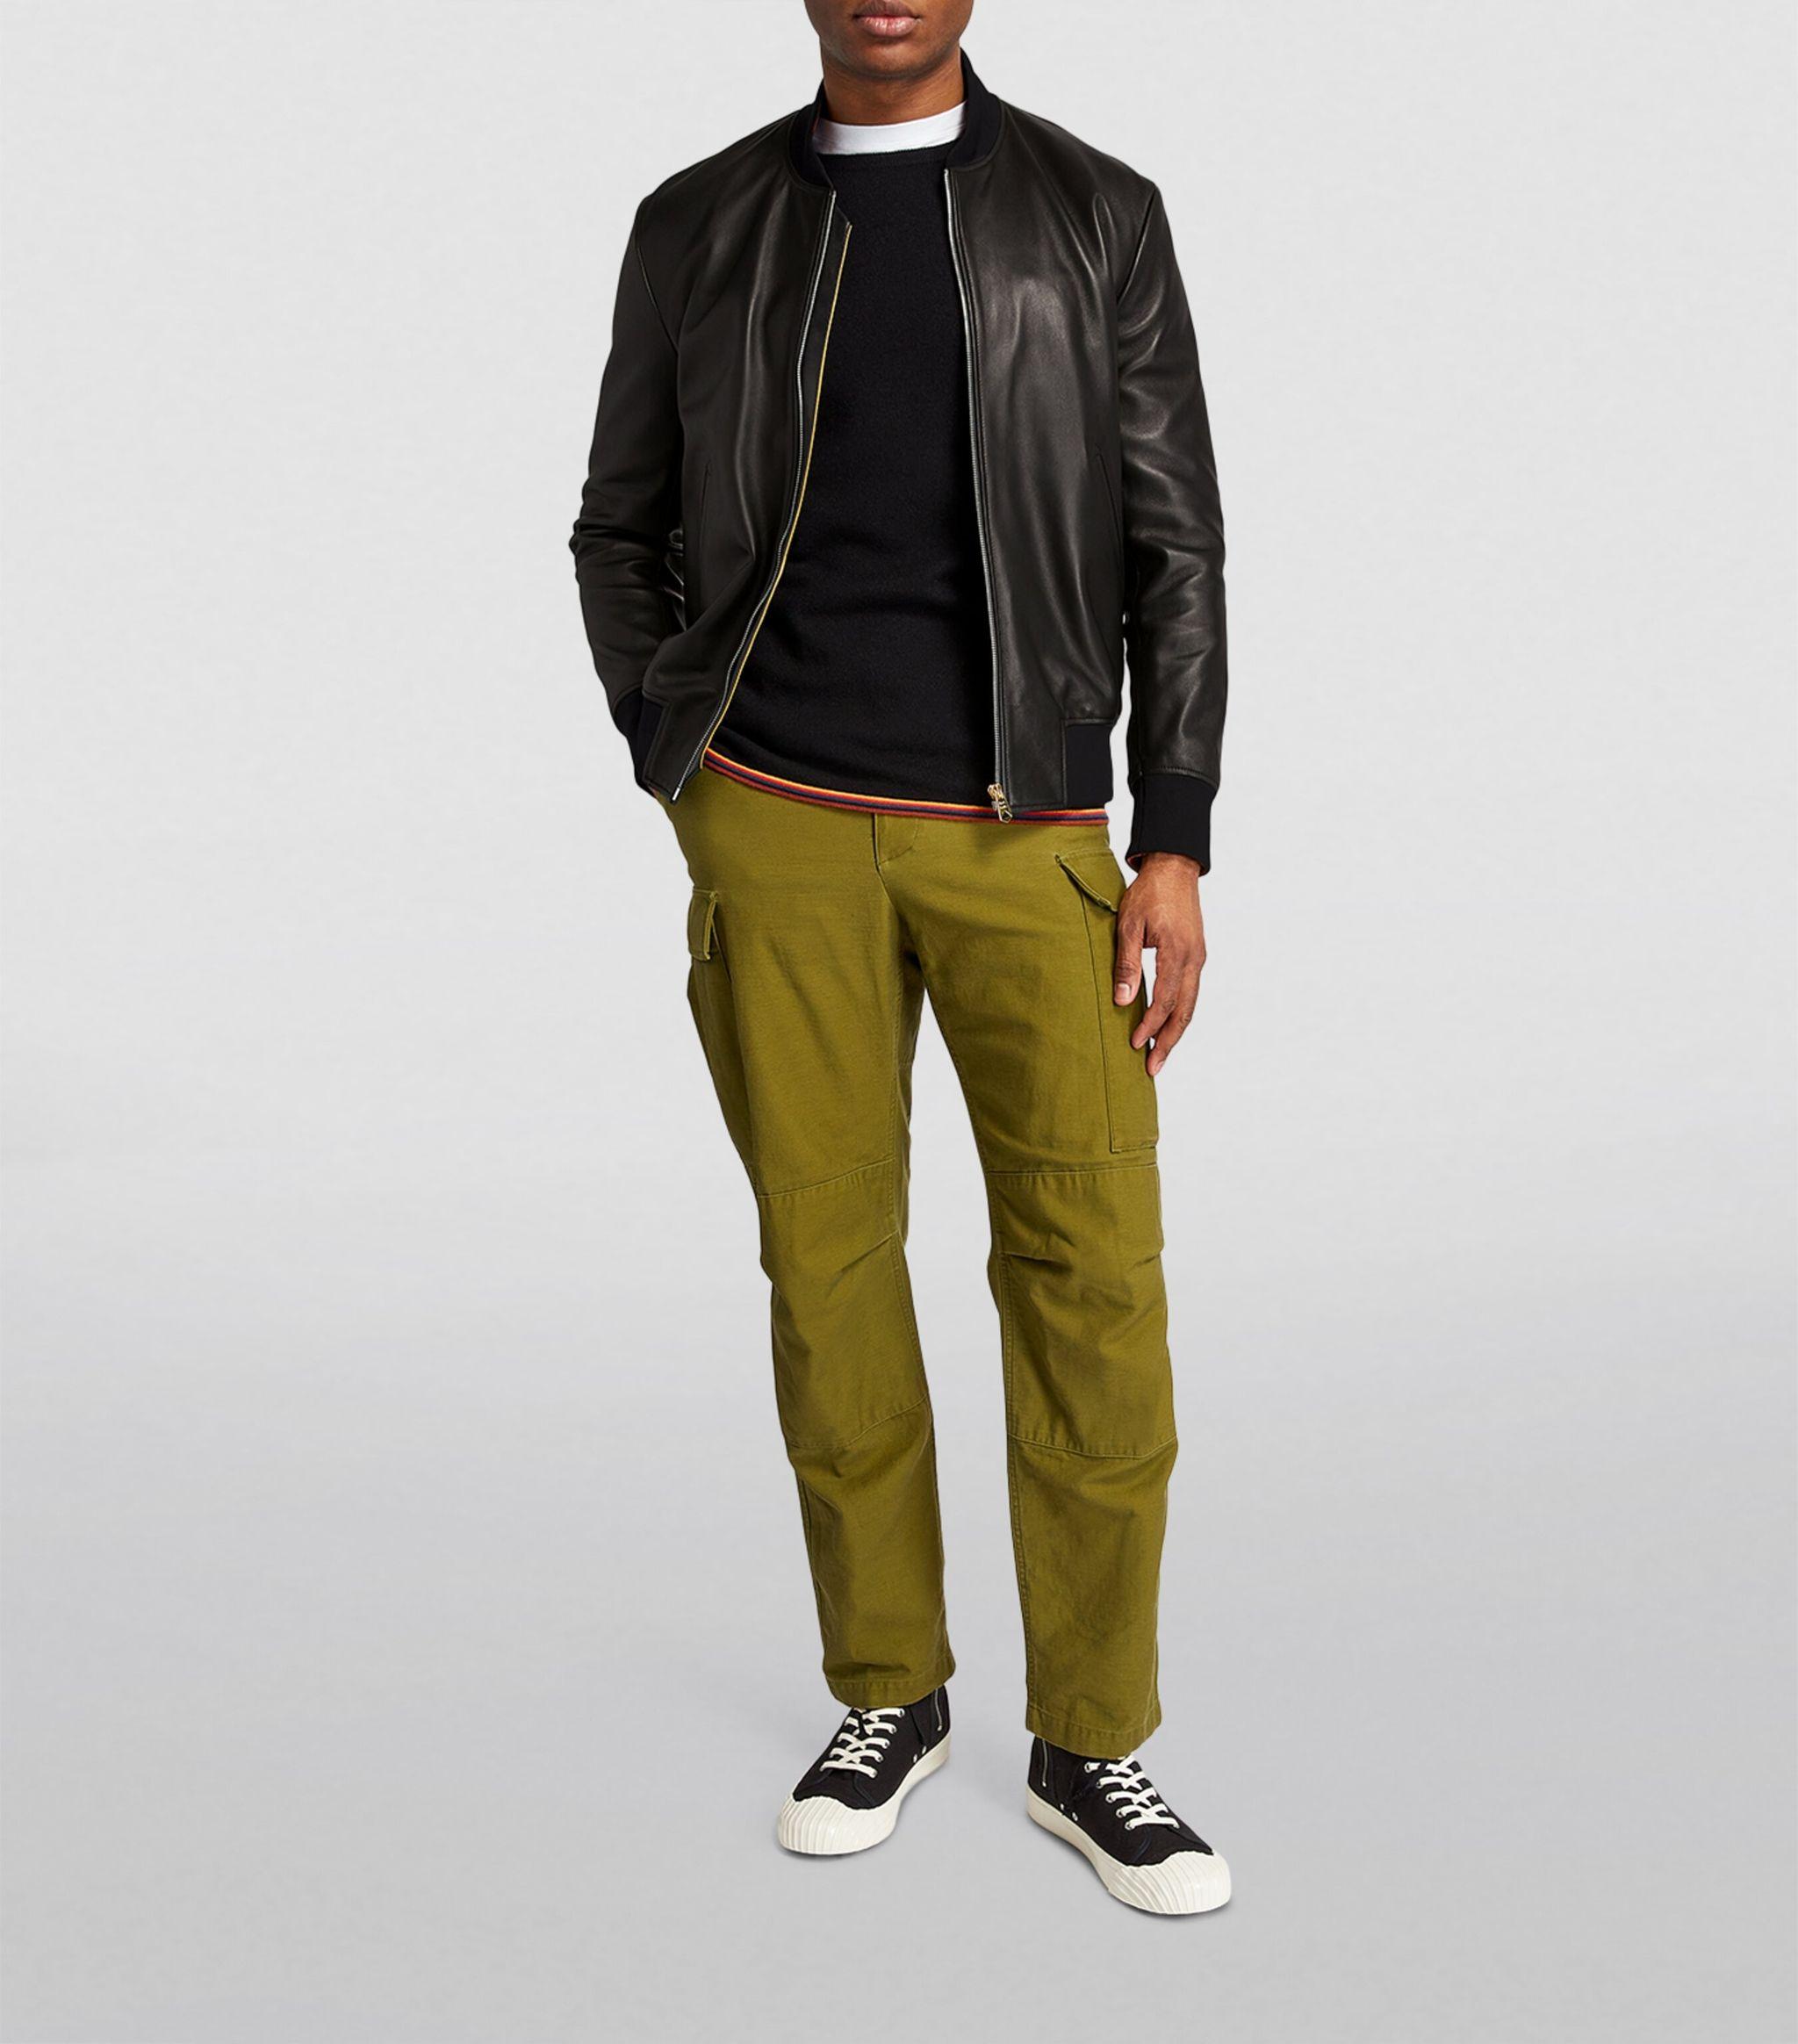 Paul Smith Leather Bomber Jacket in Black for Men | Lyst